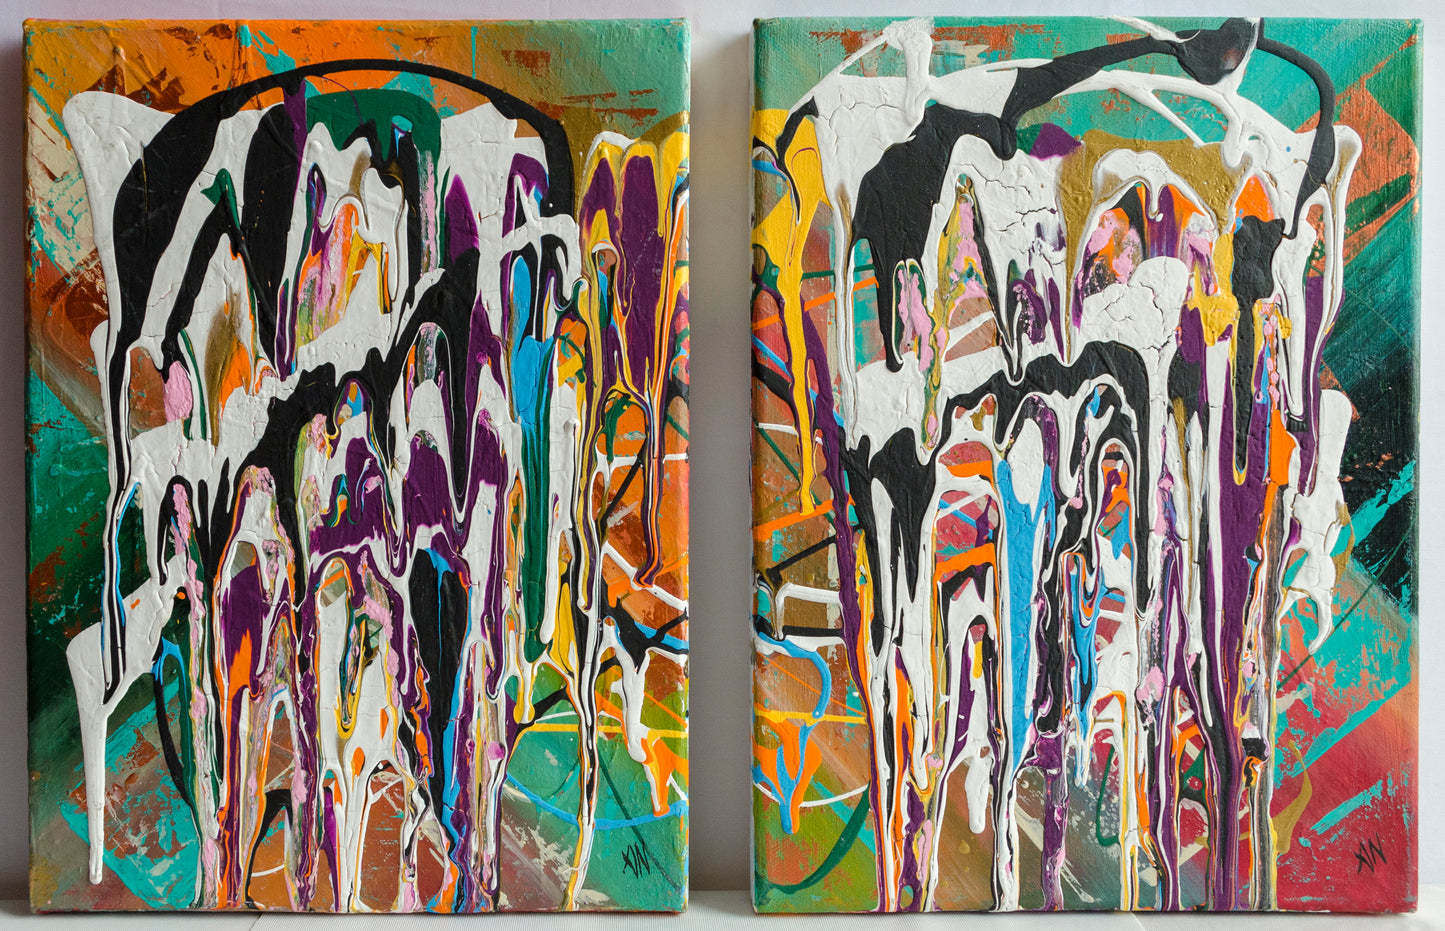 Abstract art, abstract expression, drip, colour, diptych, contemporary art, art gallery, wall art, wall decor